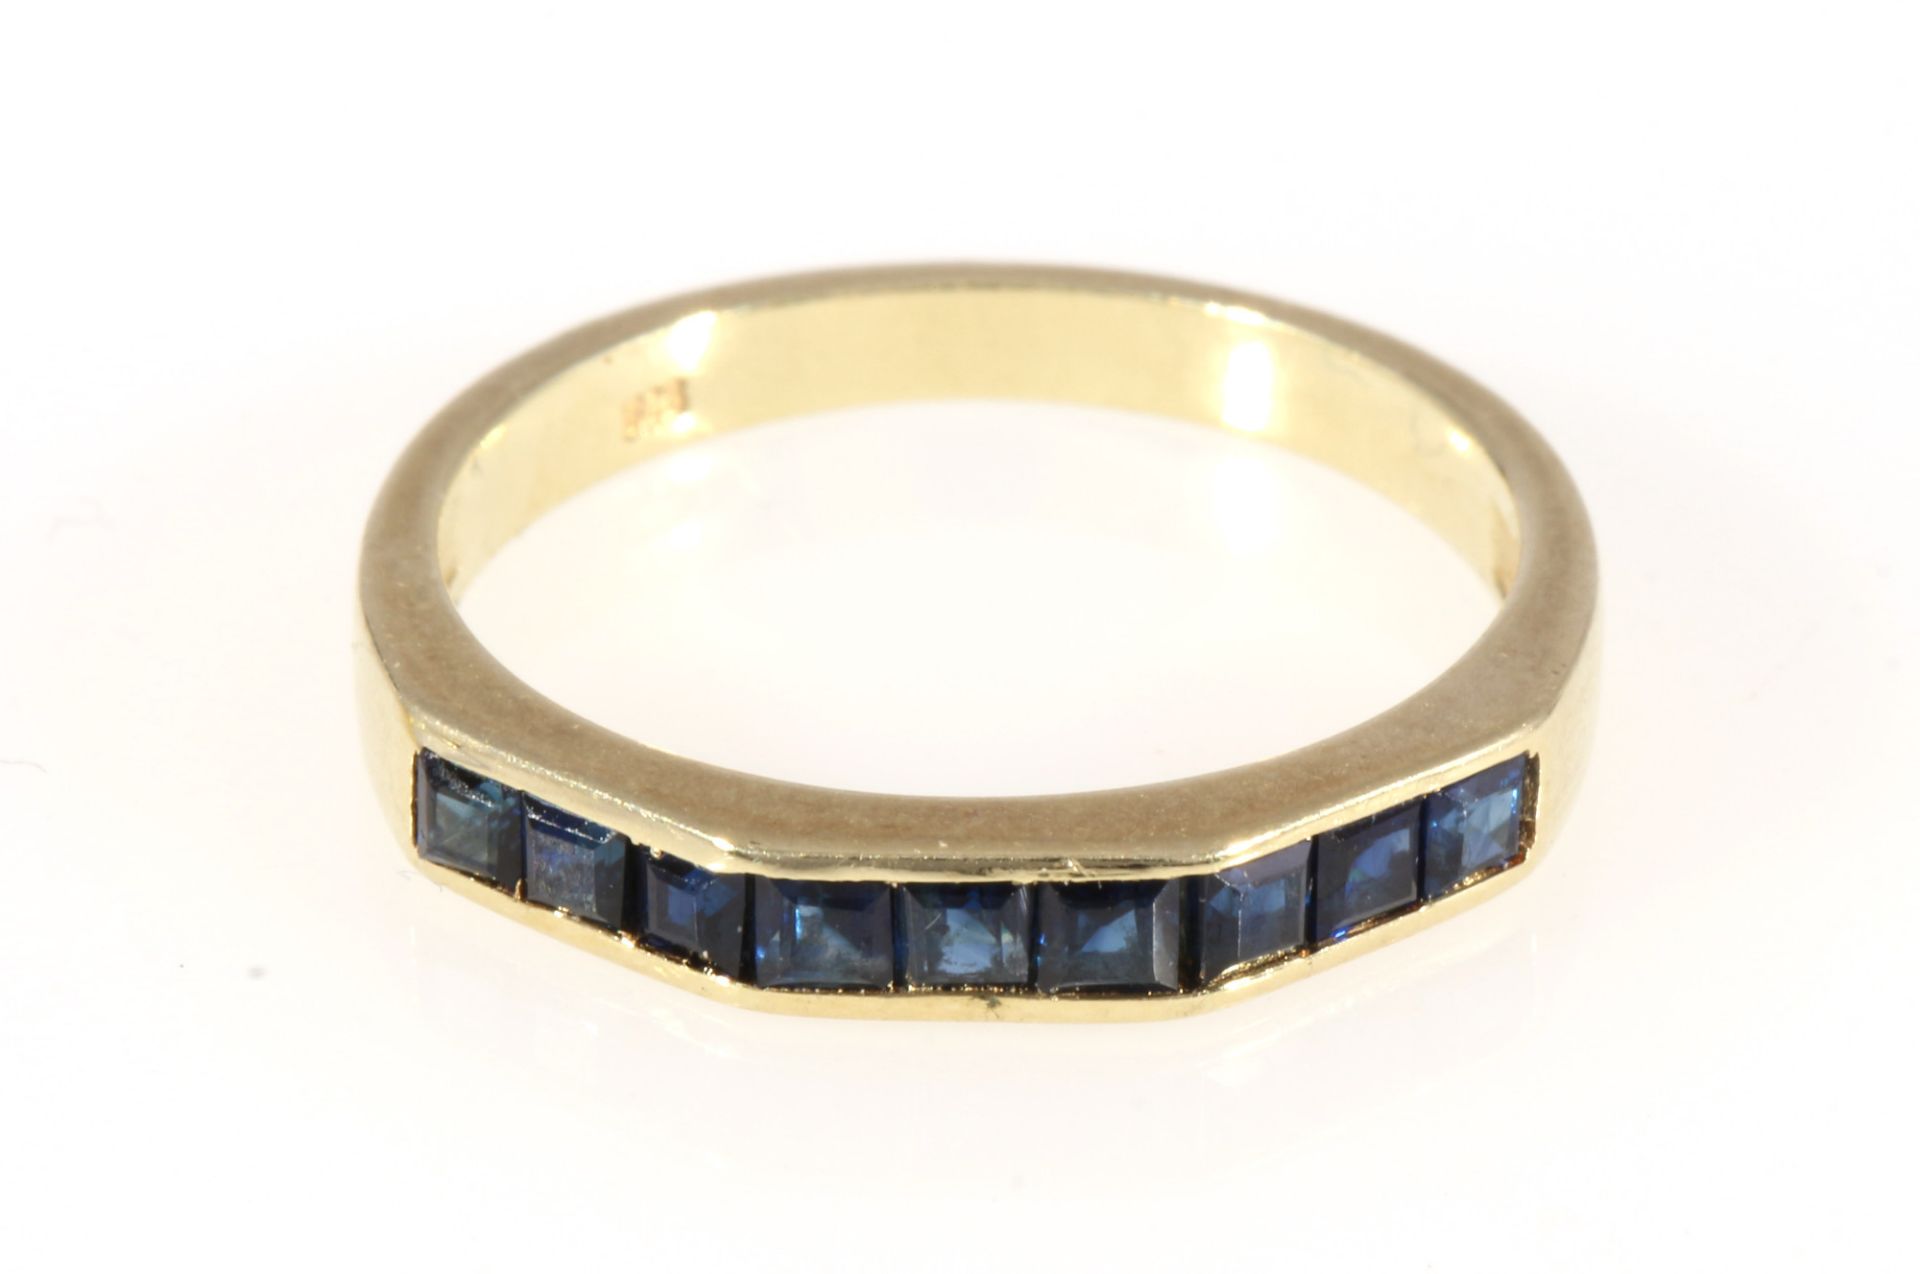 585 gold 2 rings with sapphires, 14K Gold 2 Ringe mit Saphiren, - Image 4 of 5